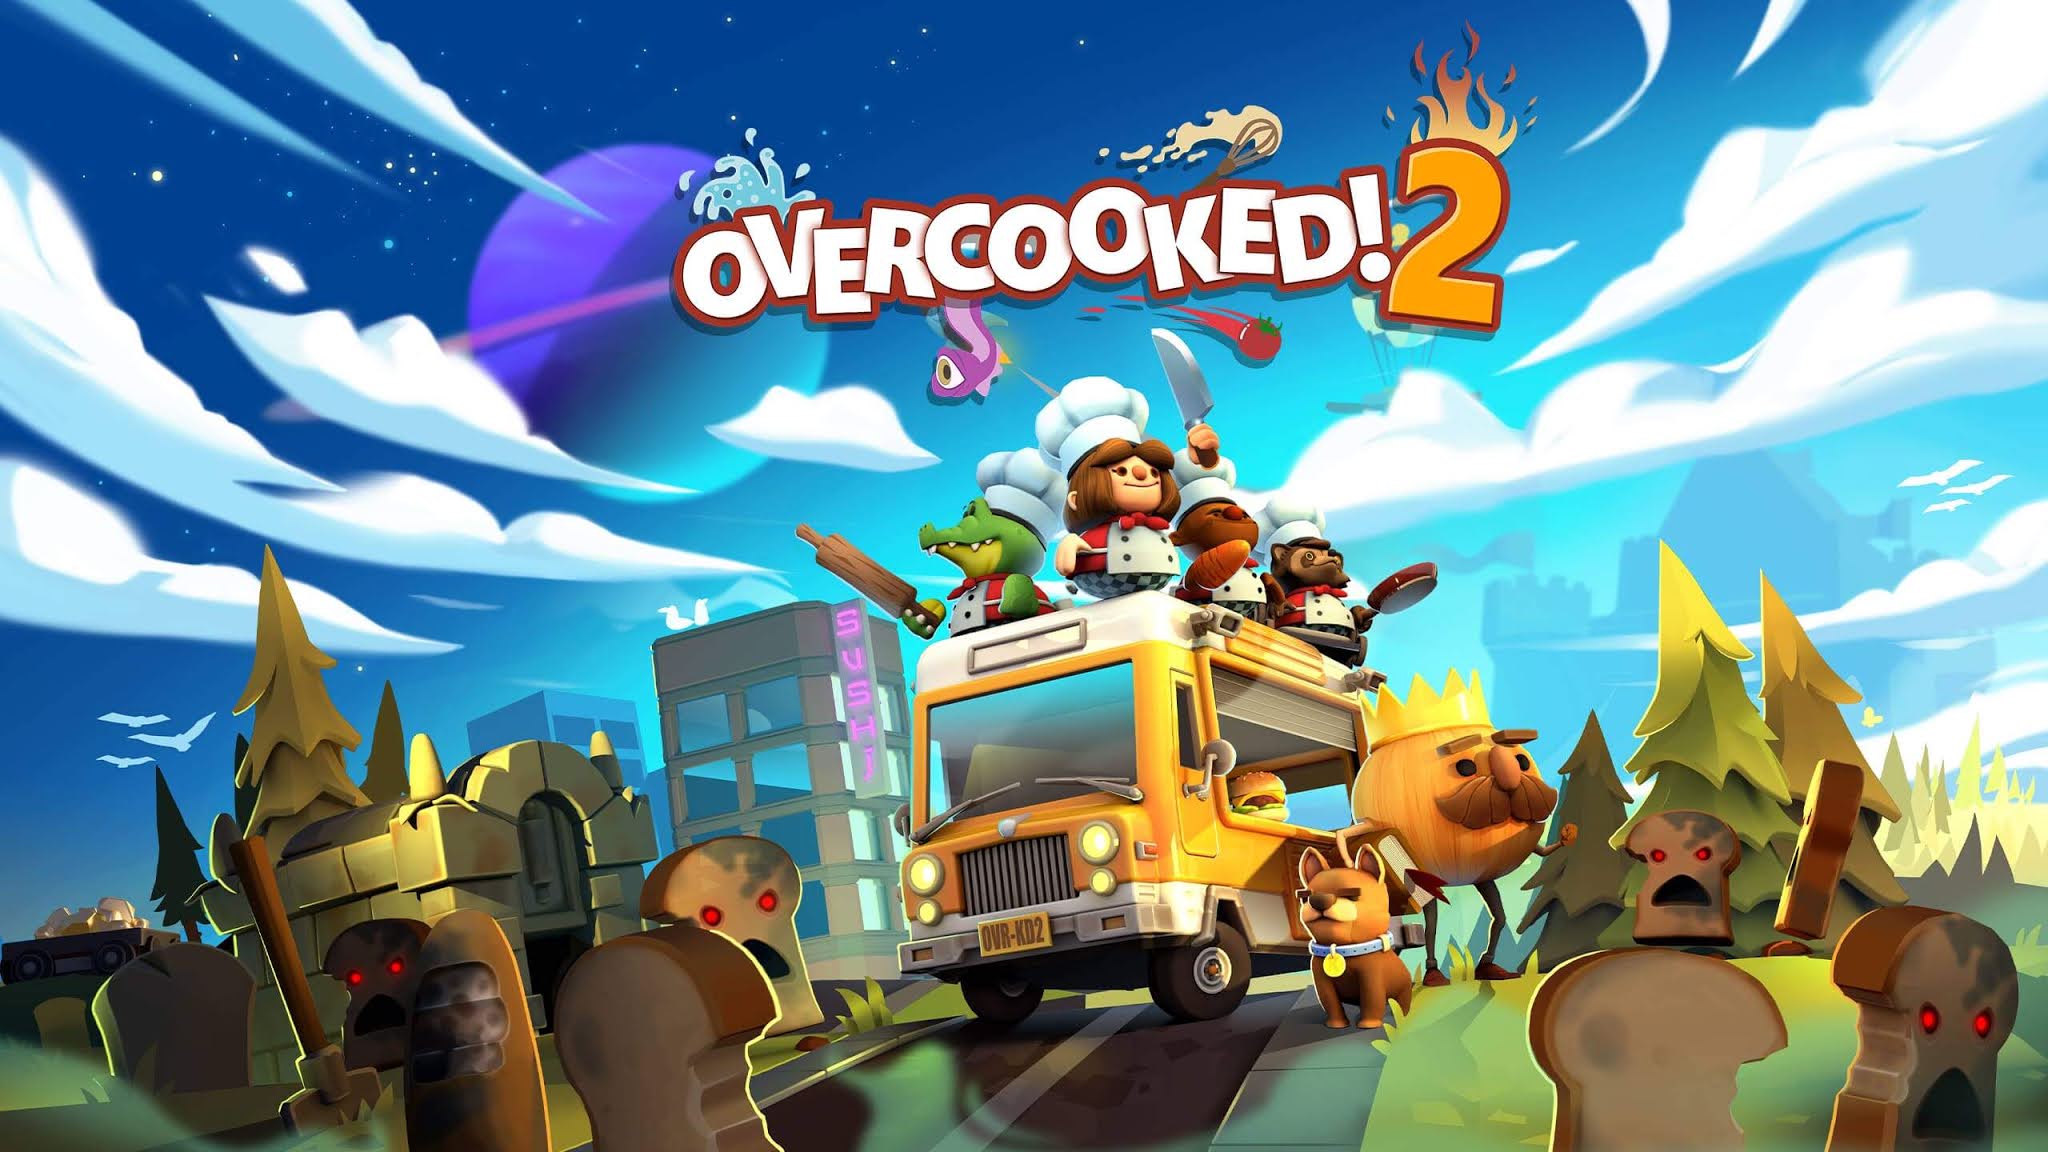 Jogos Grátis Epic Games (17/06): Overcooked! 2 e Hell is Other Demons